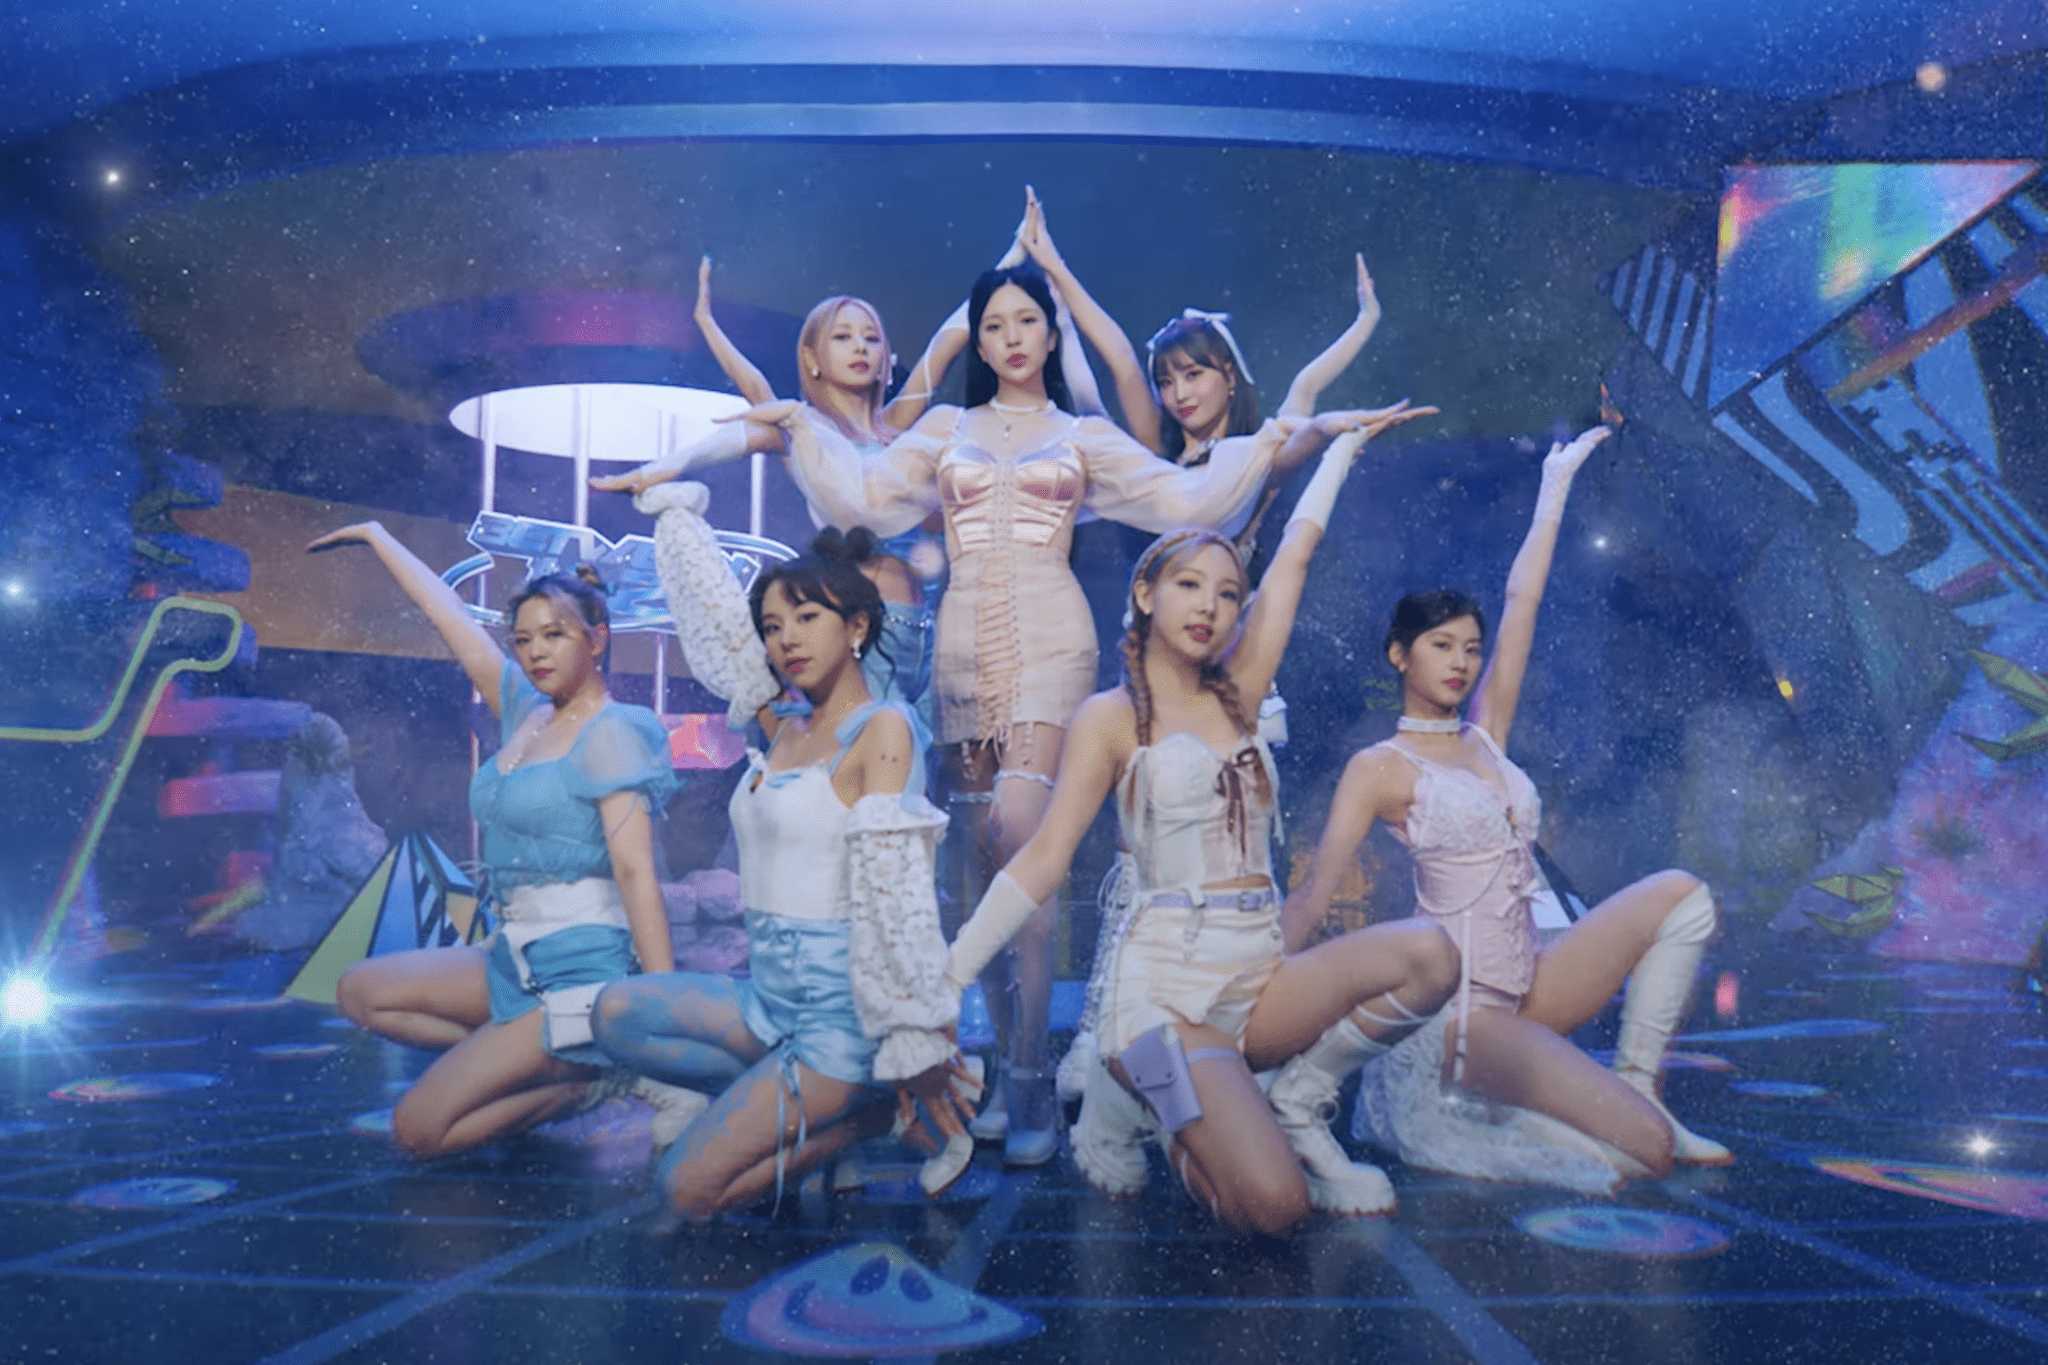 Update: TWICE Asks You To “Talk That Talk” In New MV Teaser For Comeback  Track